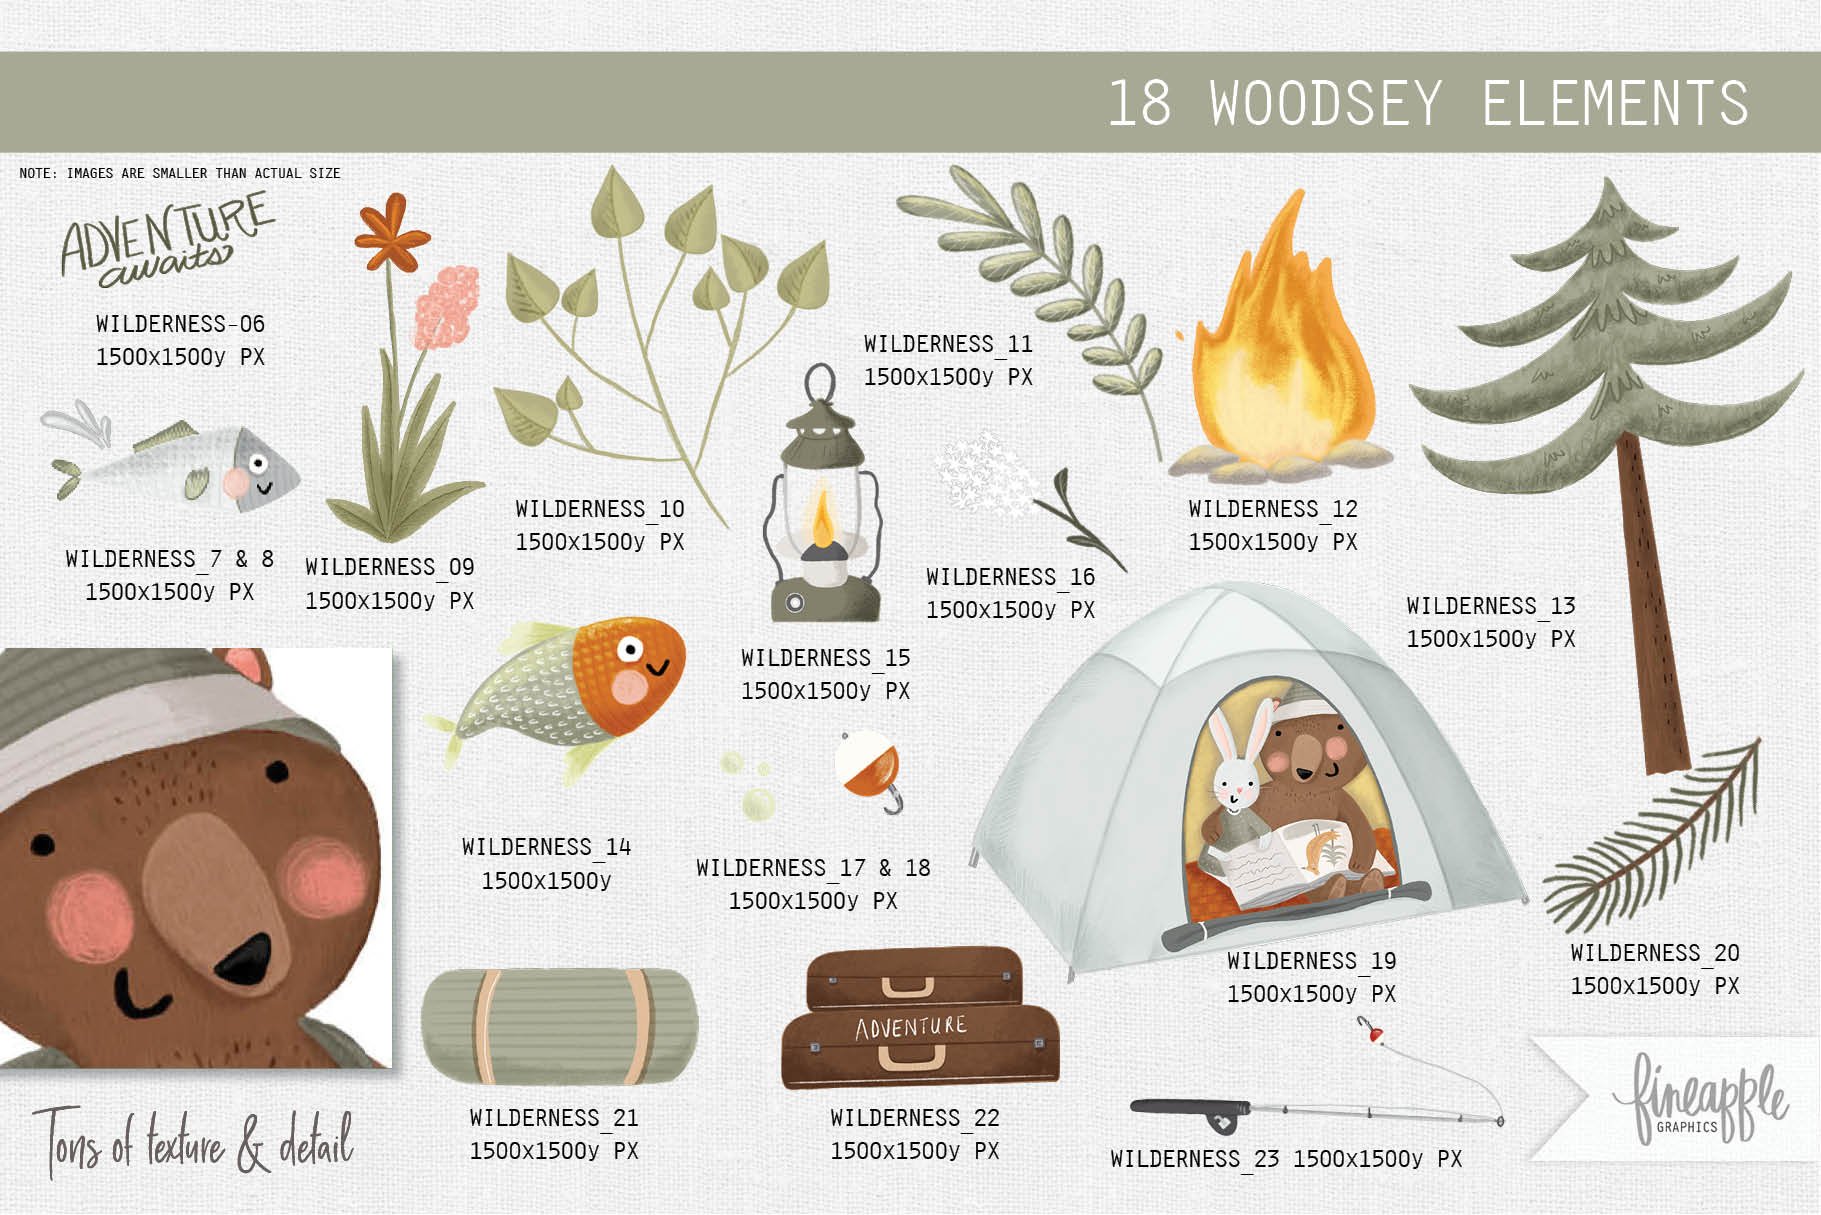 Necessary elements for camping composition.